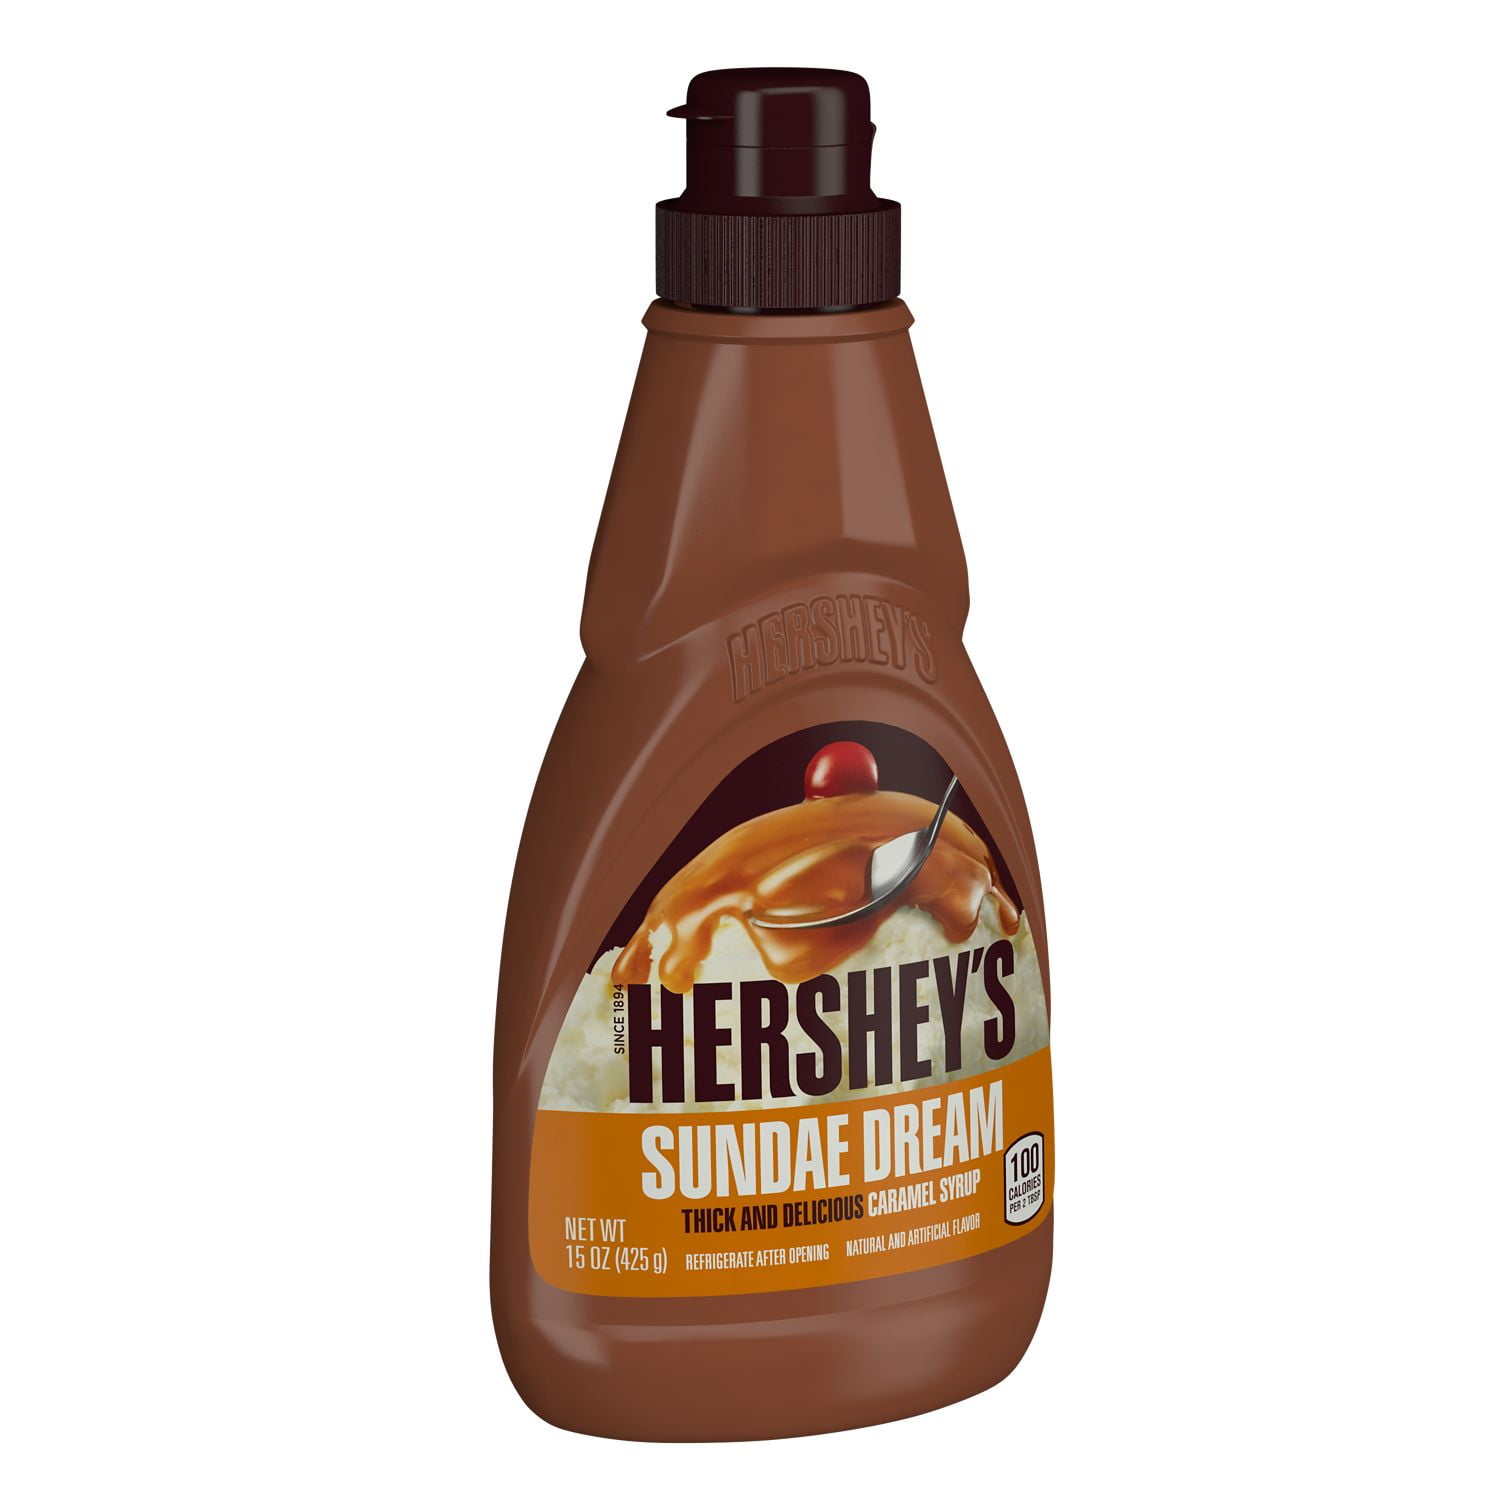 Hershey's Sundae Dream Thick and Delicious Caramel Syrup, 15 Oz.